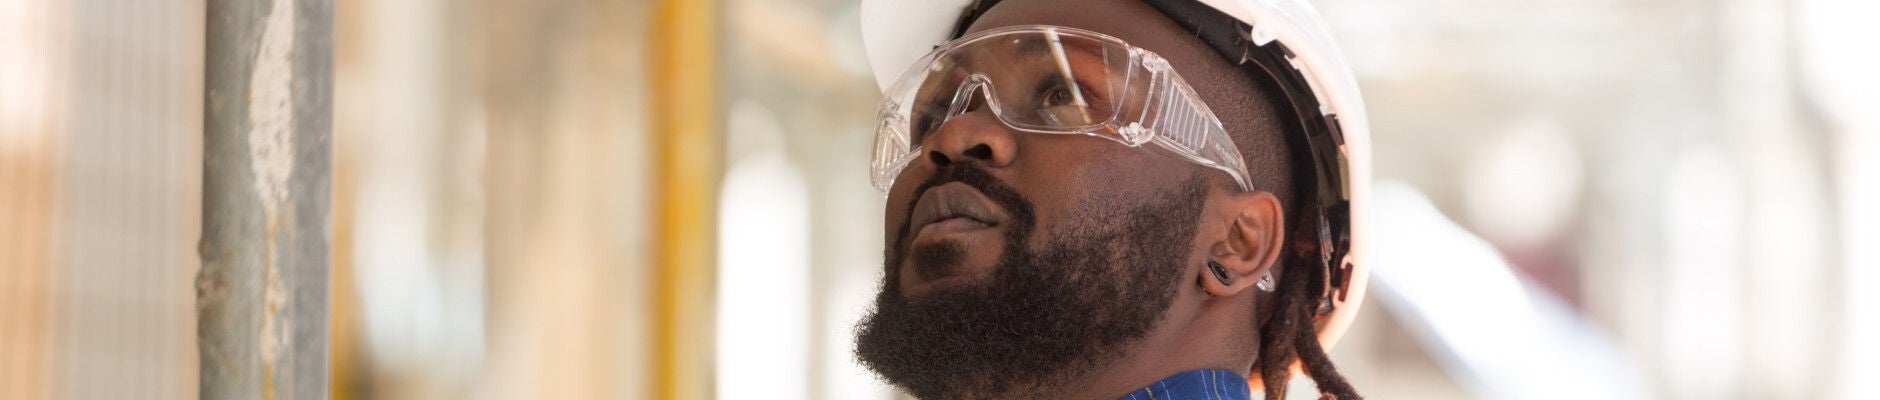 African American man wearing googles and a hard hat looking up at a construction site.